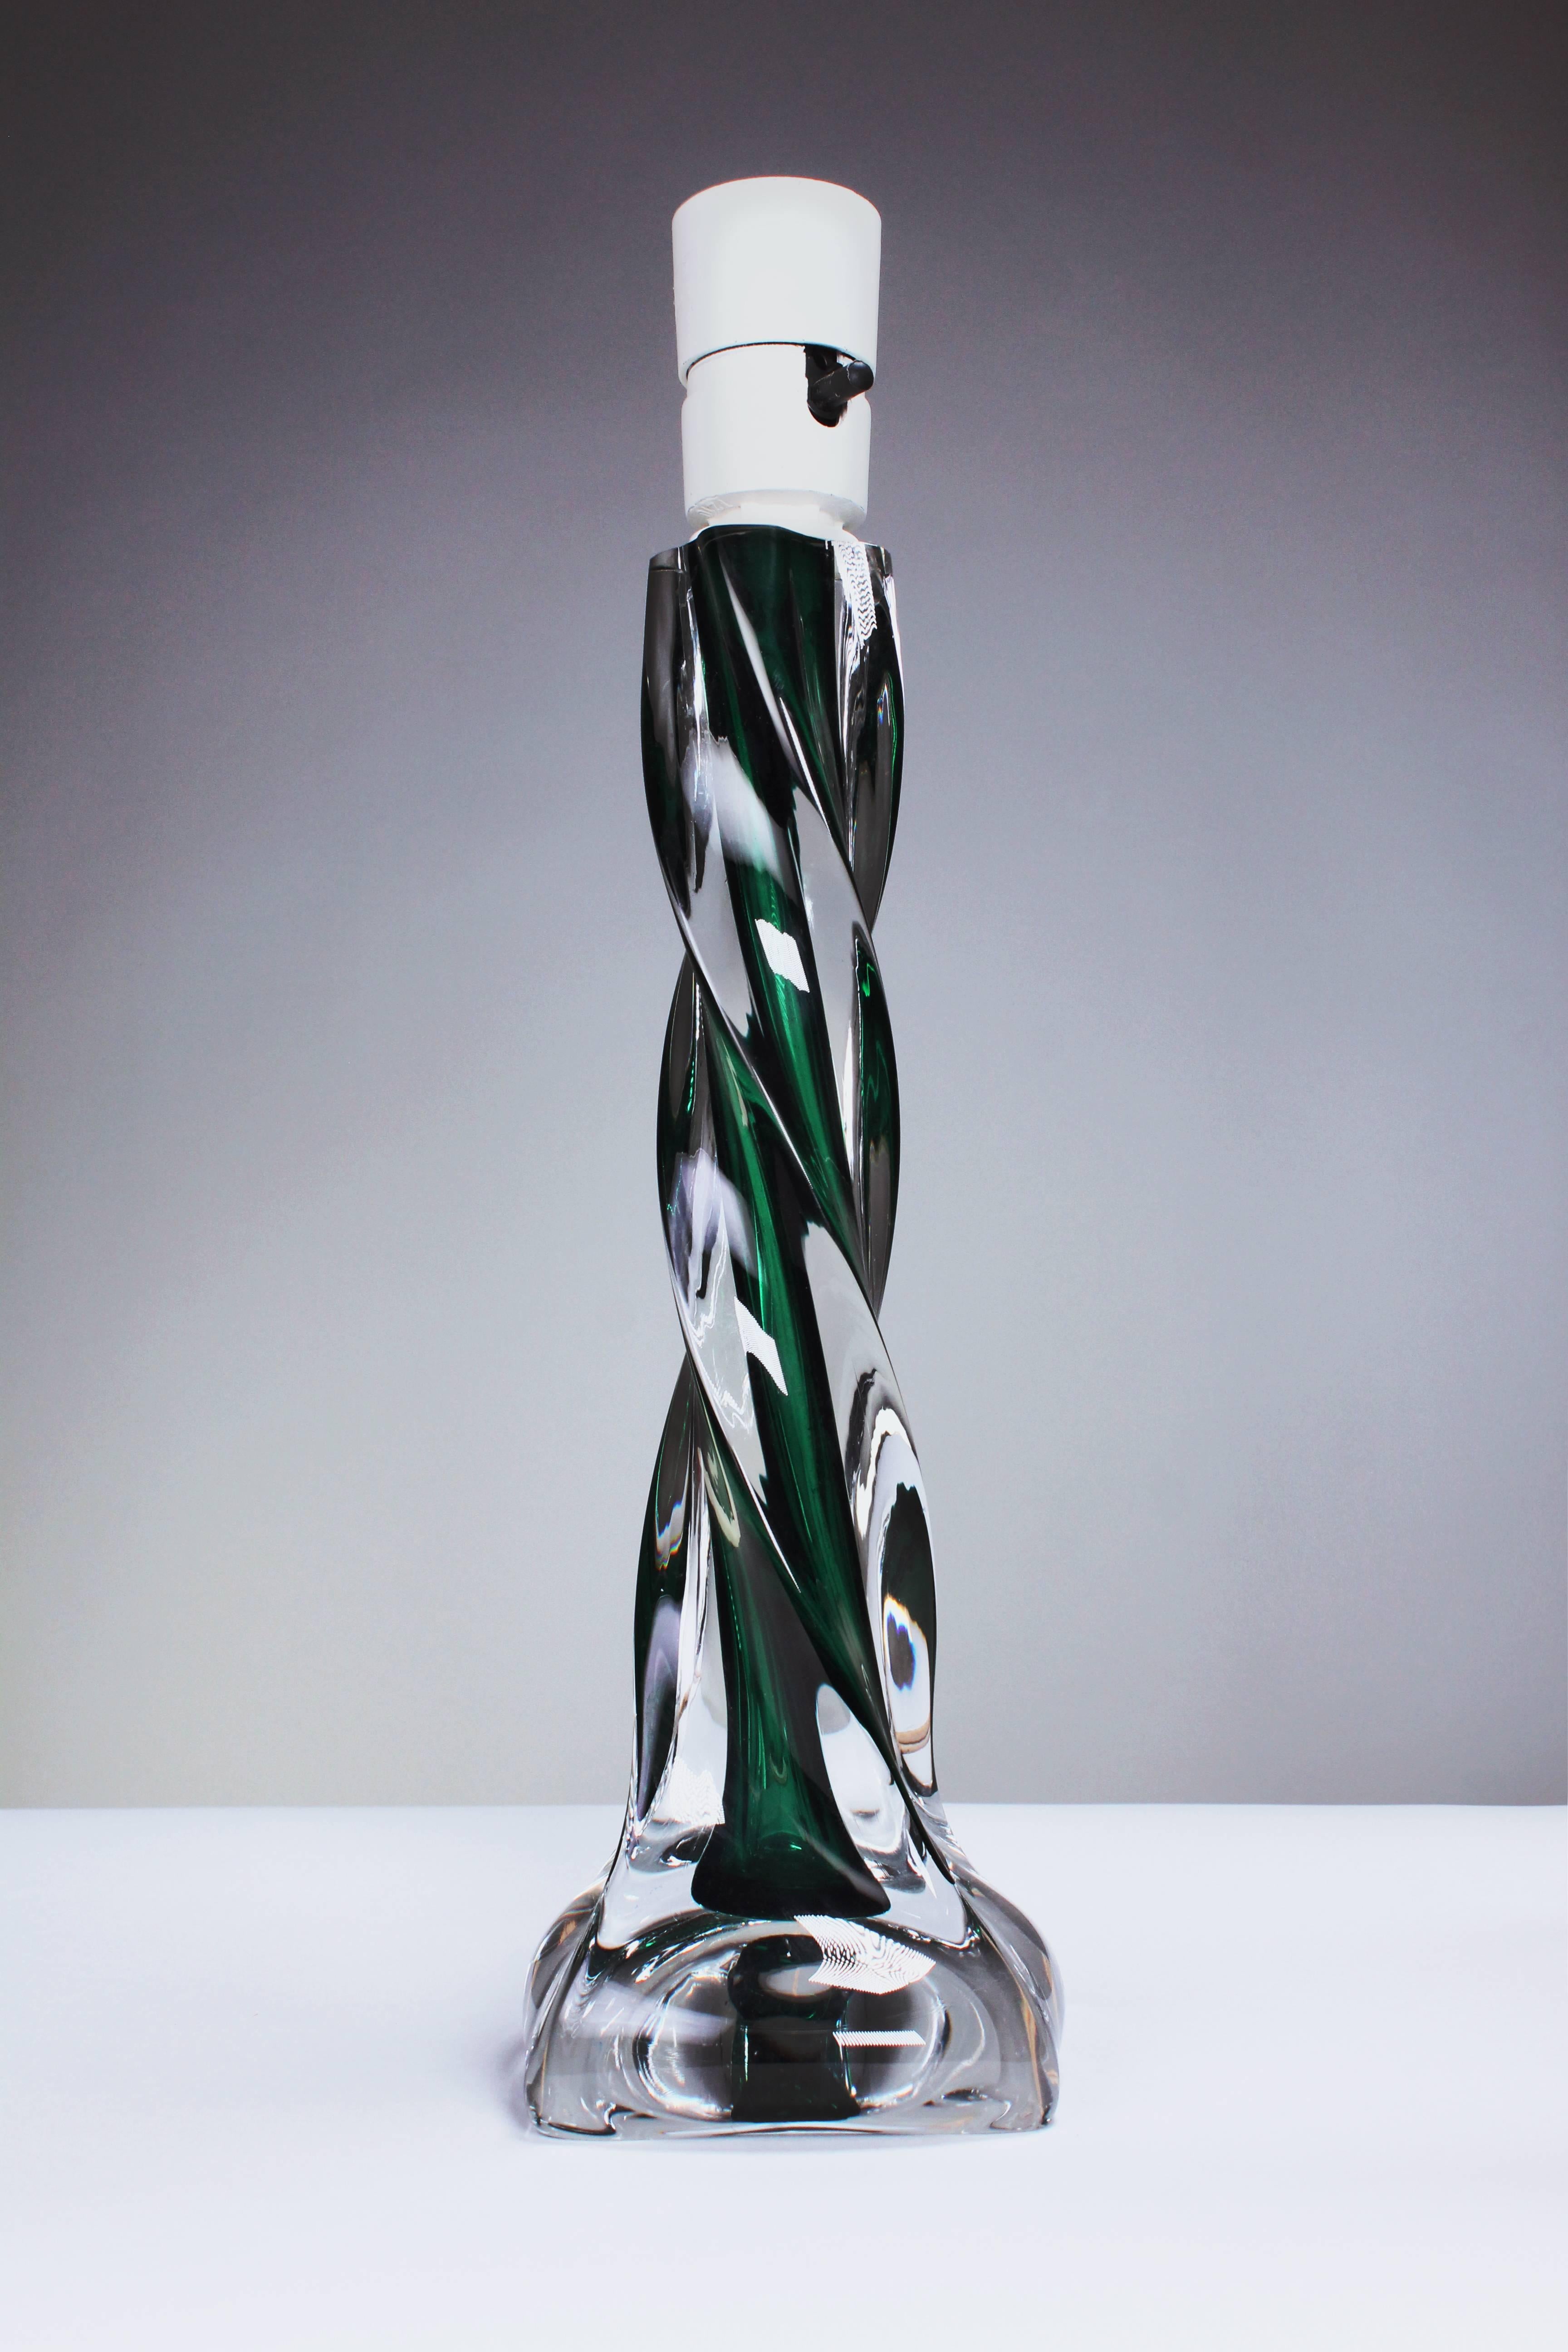 Elegant swirling emerald green Swedish Mid-Century Modern Sommerso style art glass table lamp. Designed by Swedish Flygsfors' chief designer in the early 1950s, Paul Kedelv, known for his organic shapes and use of vivid colors. Deep forest green